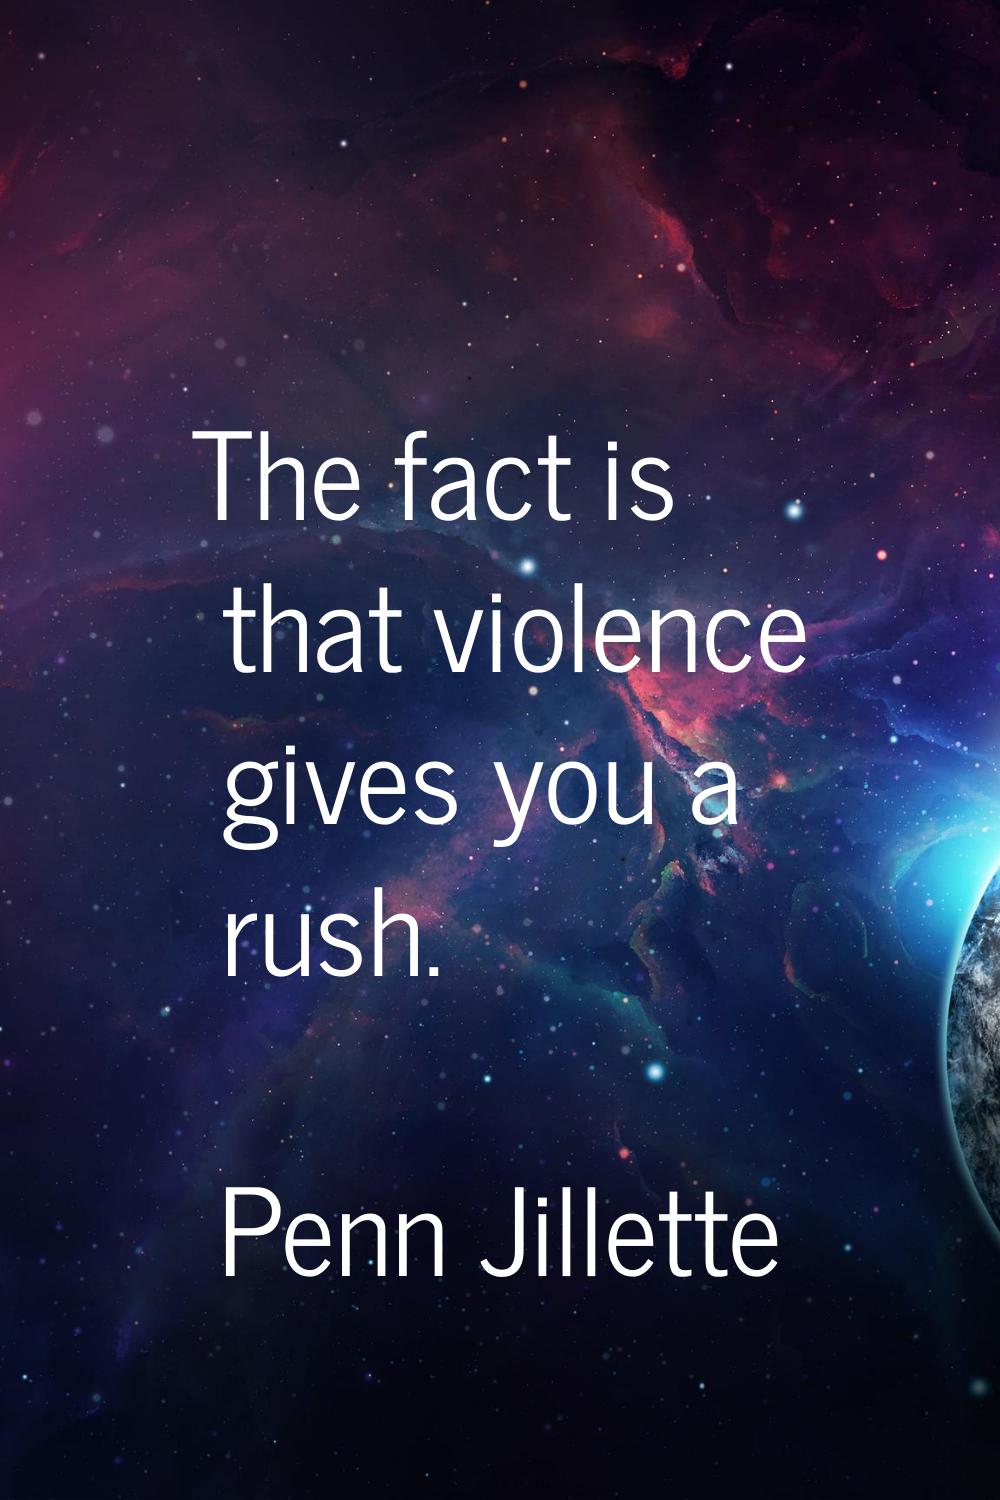 The fact is that violence gives you a rush.